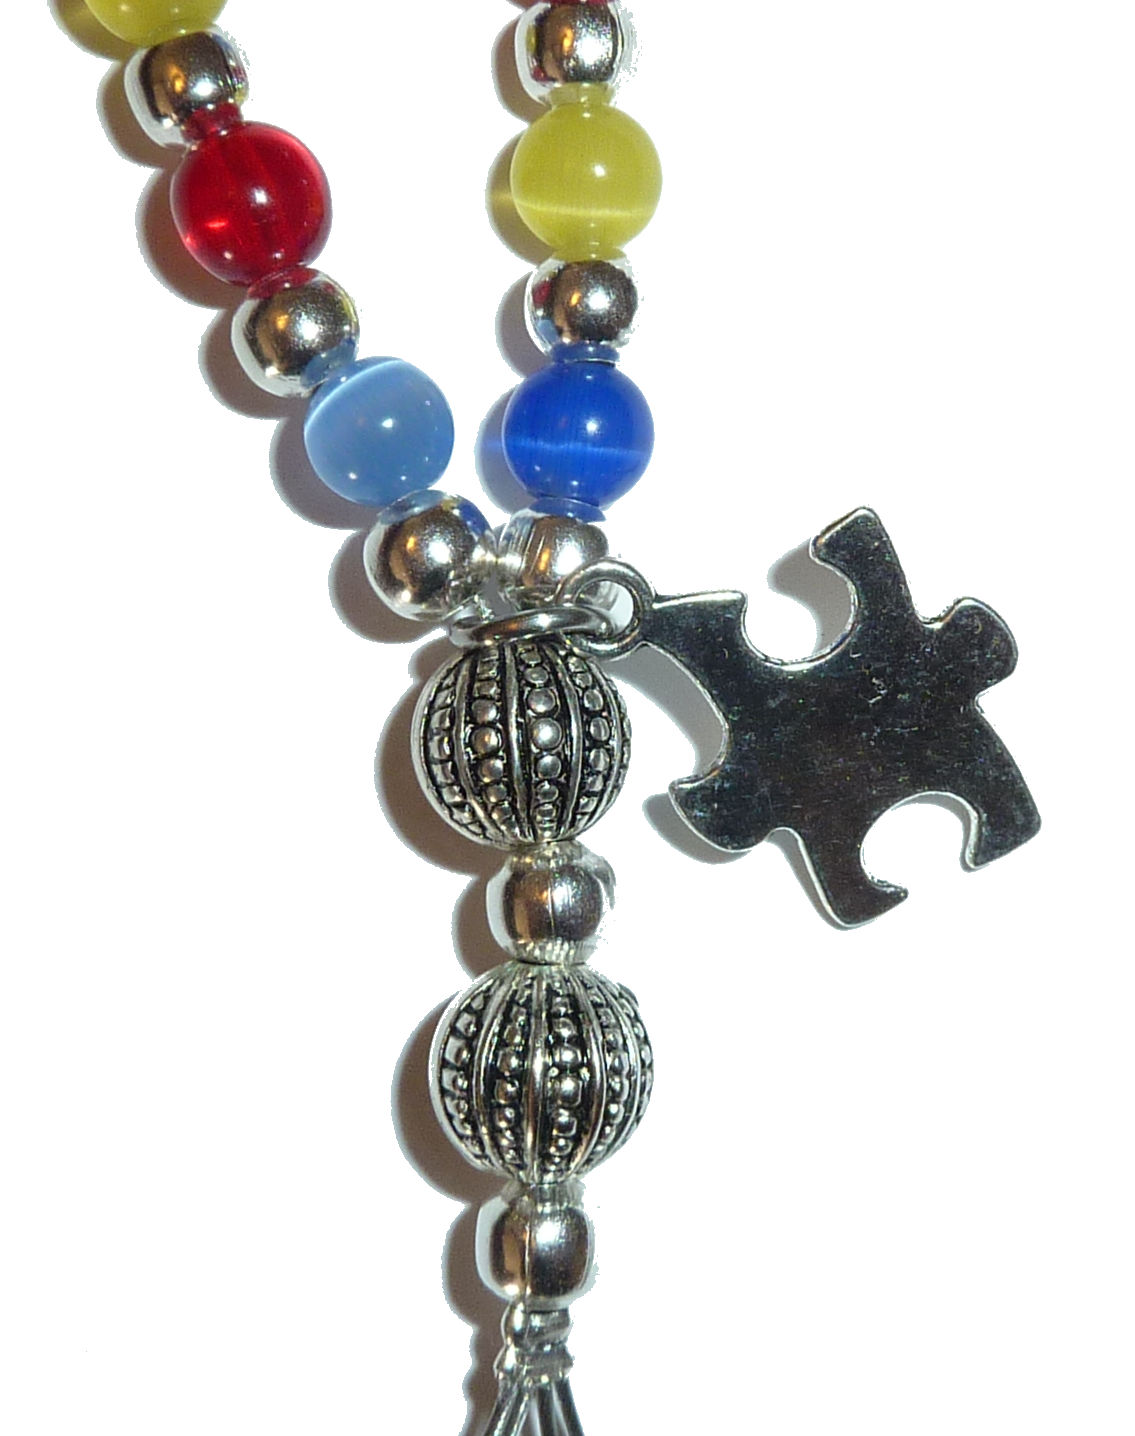 Autism Awareness With Puzzle Charm Fashion Lanyard with break away magnetic clasp